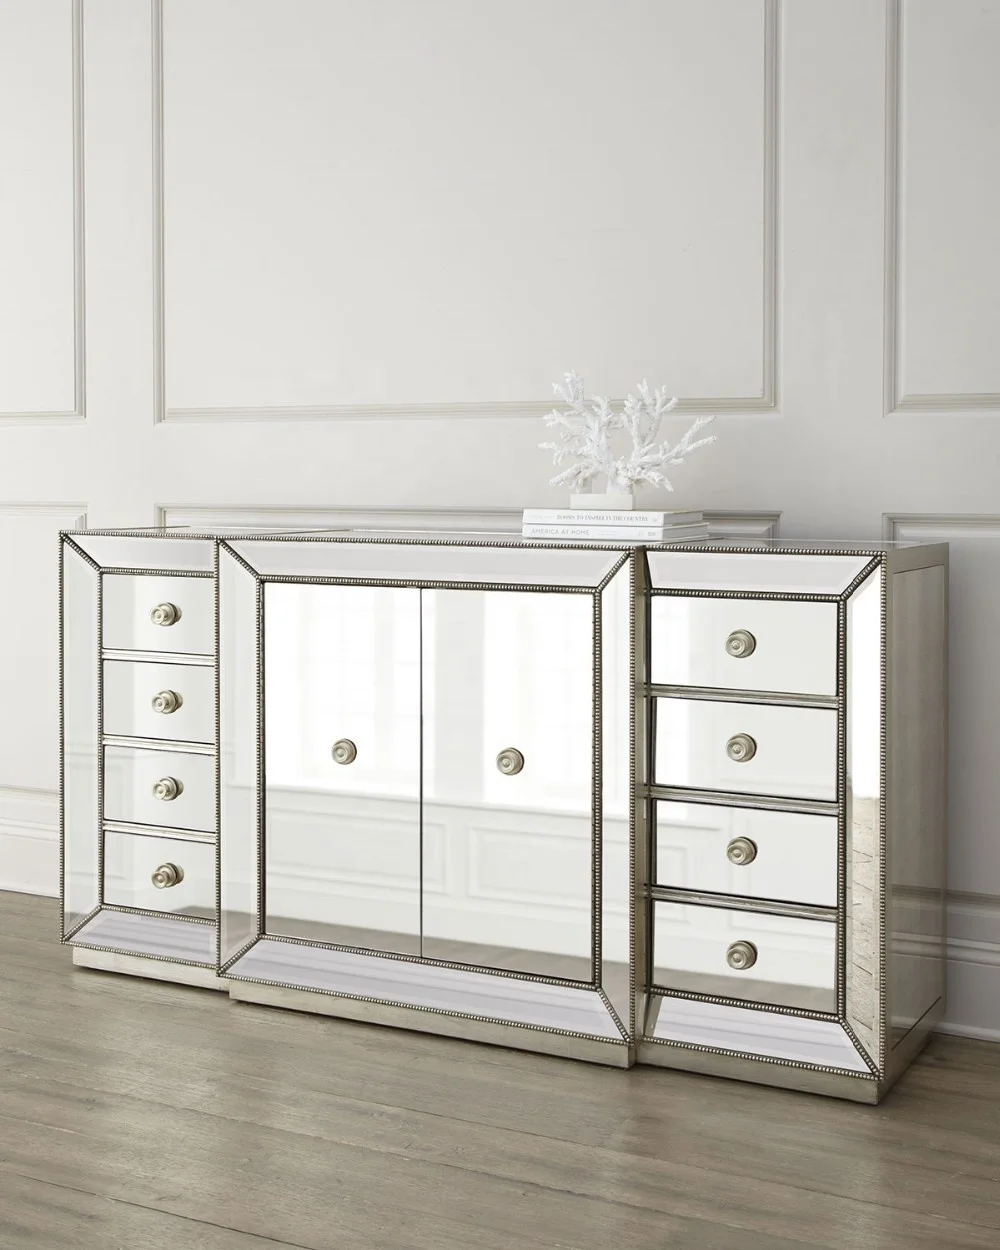 Modern Hot selling Most popular Handmade extra  Long Decorative 2 doors 8 drawers Mirror Cabinet Buffet Sideboard